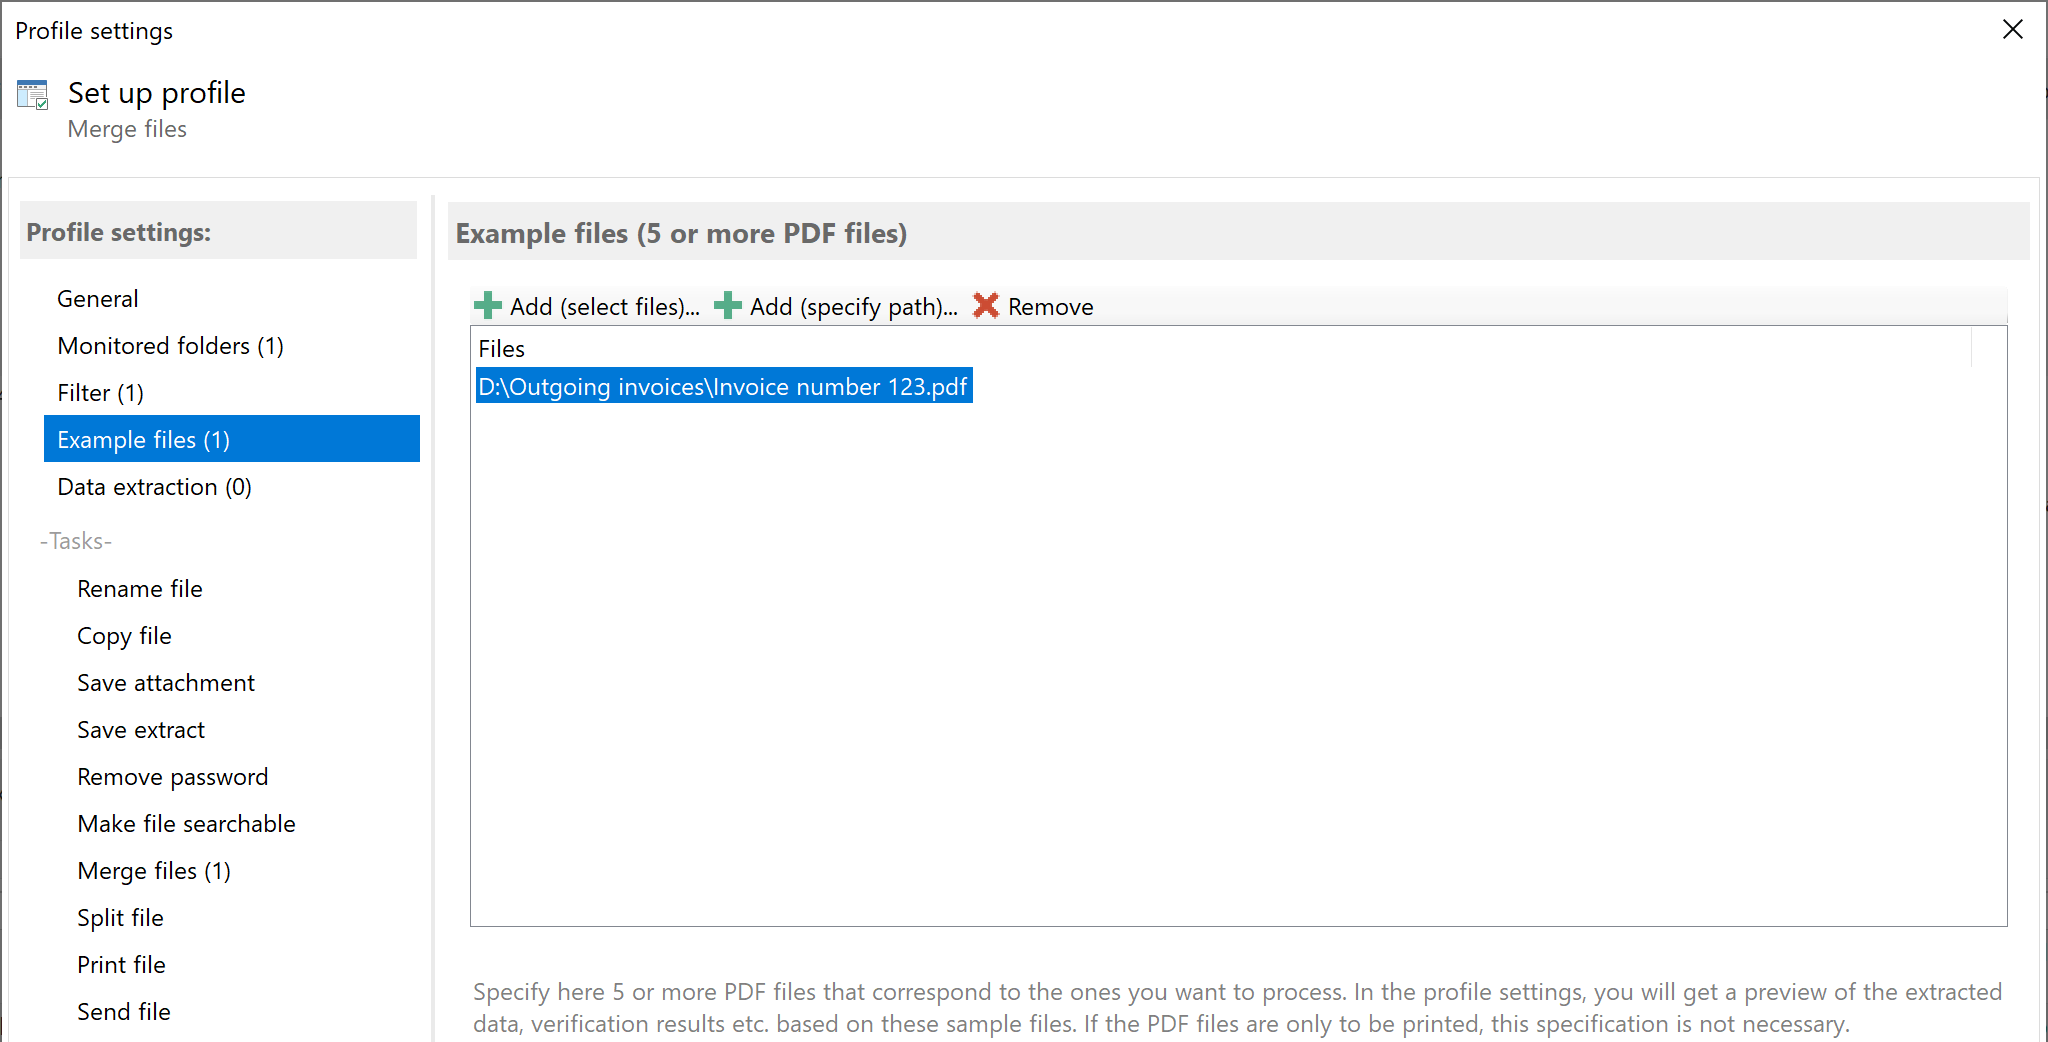 Add some example PDF files